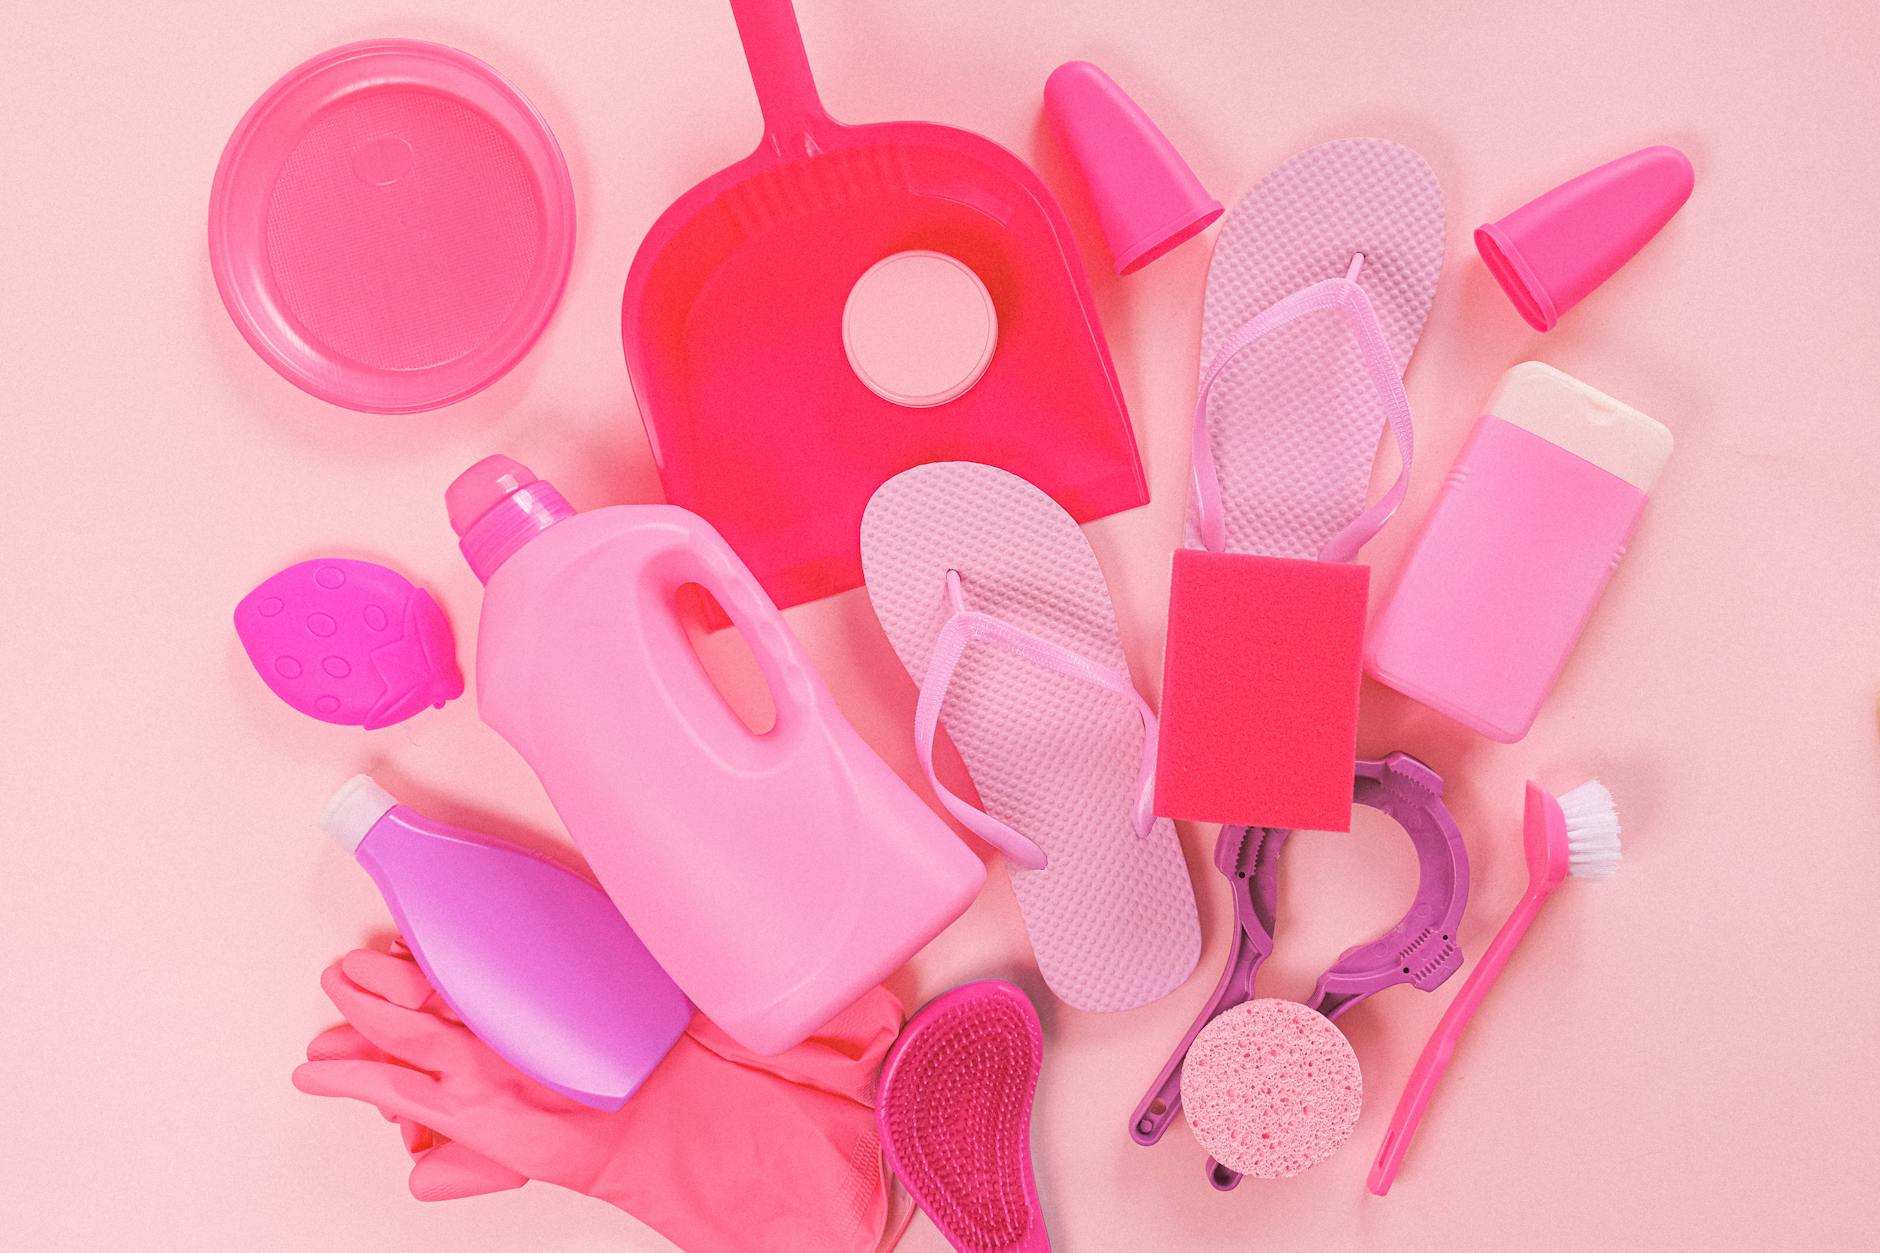 Collection of various plastic detergent bottles and cleaning tools placed on pink background near flip flops and rubber gloves